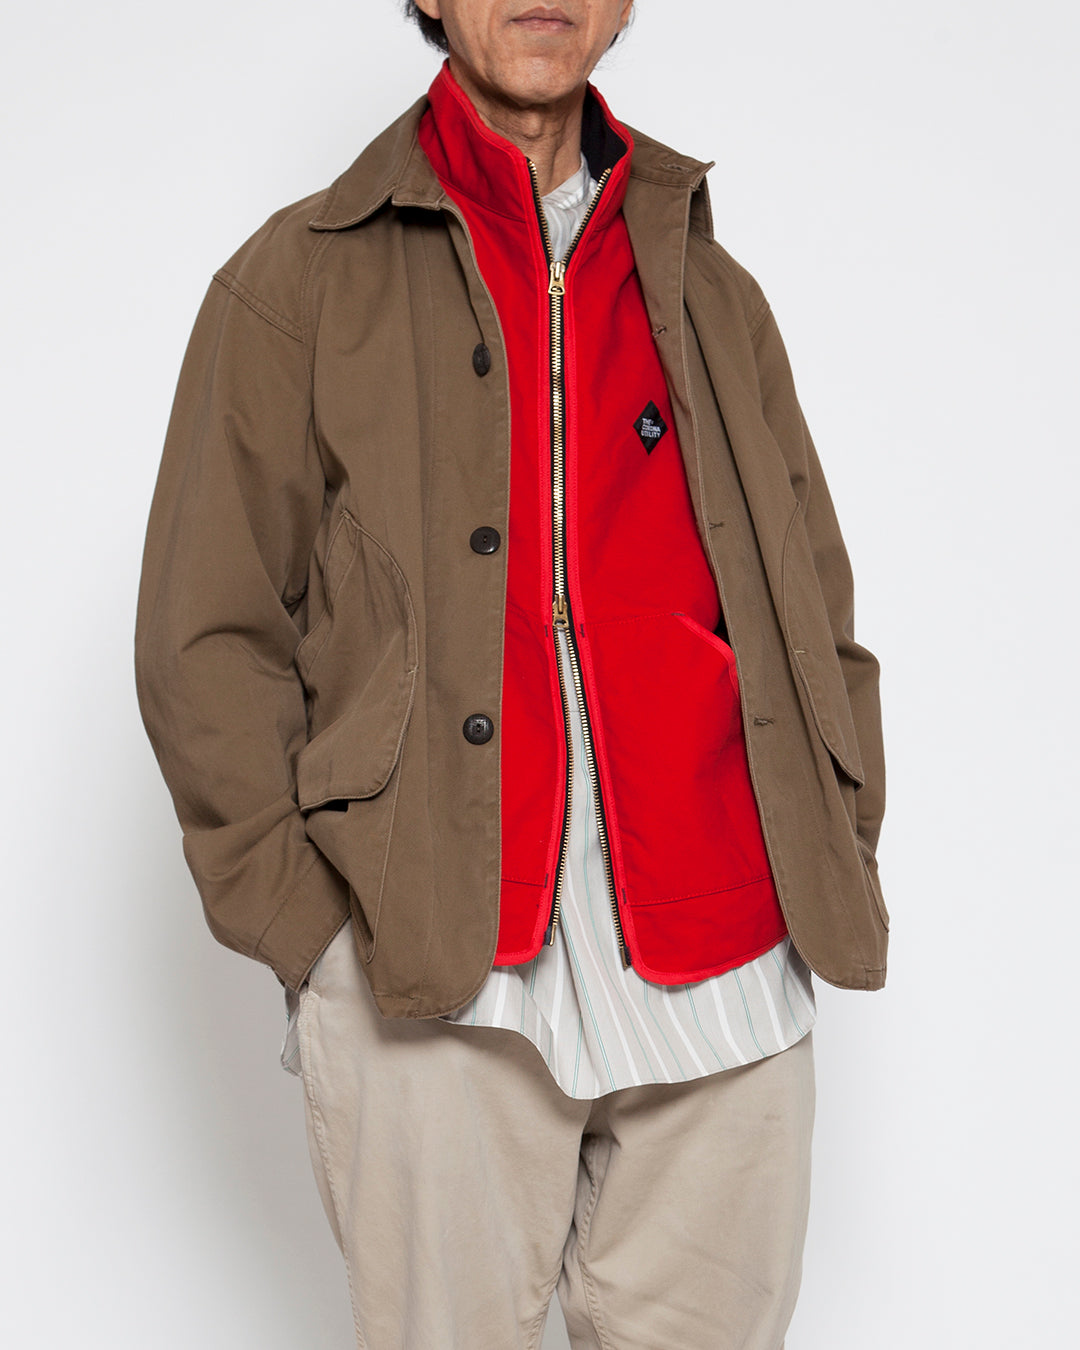 【DELIVERY】THE CORONA UTILITY・CJ001L - GAME JACKET LIGHT 23